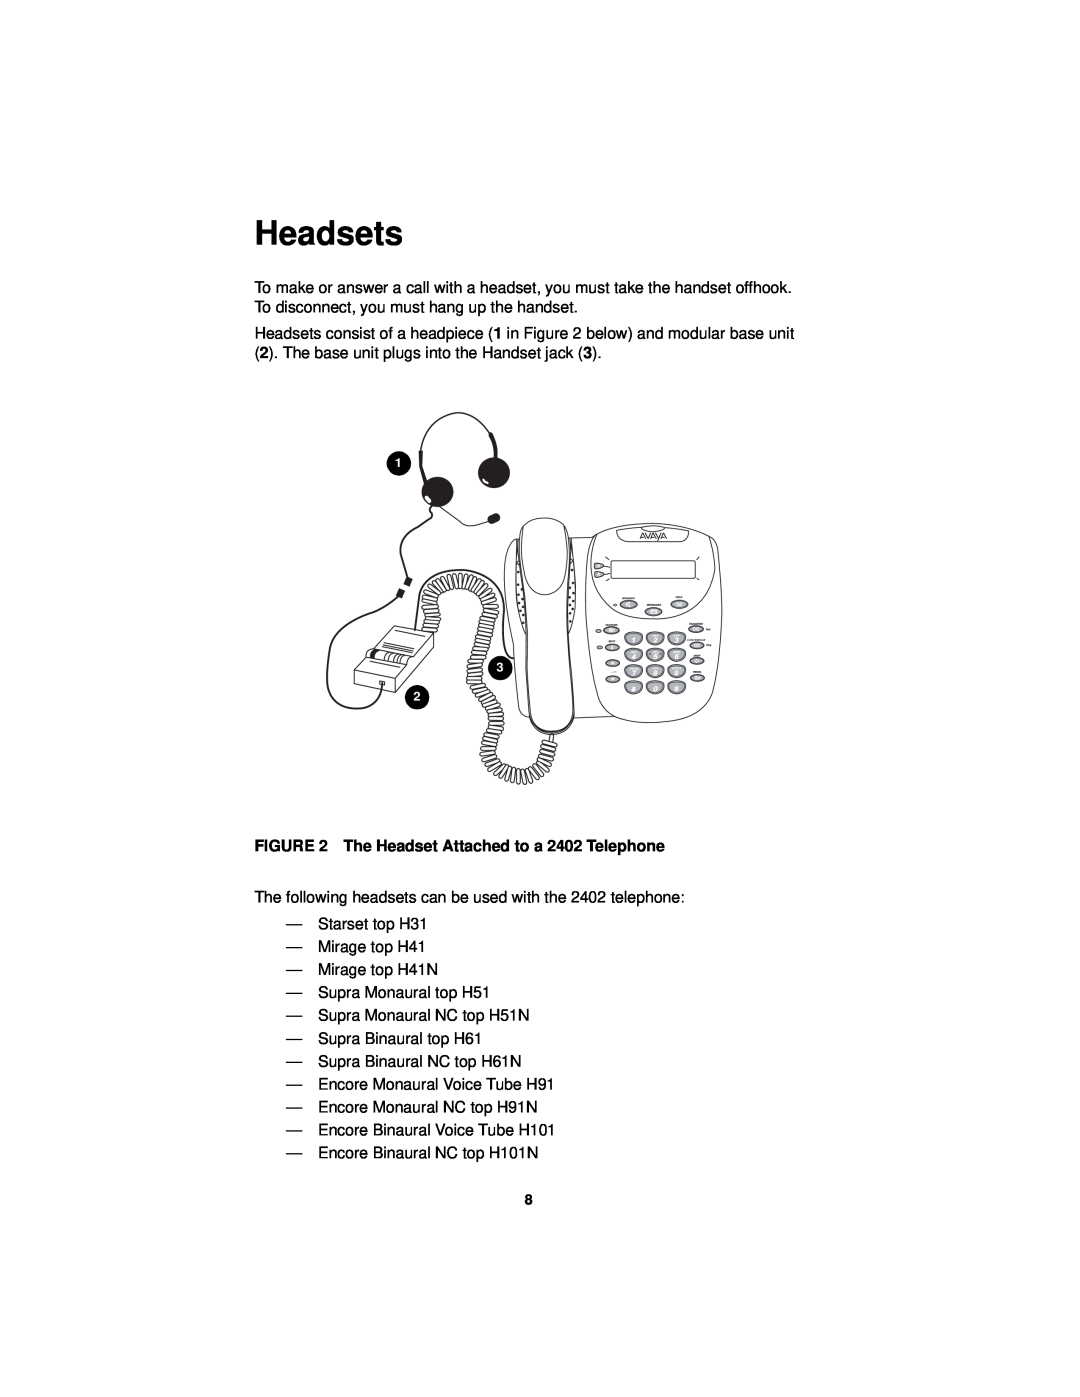 Avaya manual Headsets, The Headset Attached to a 2402 Telephone 